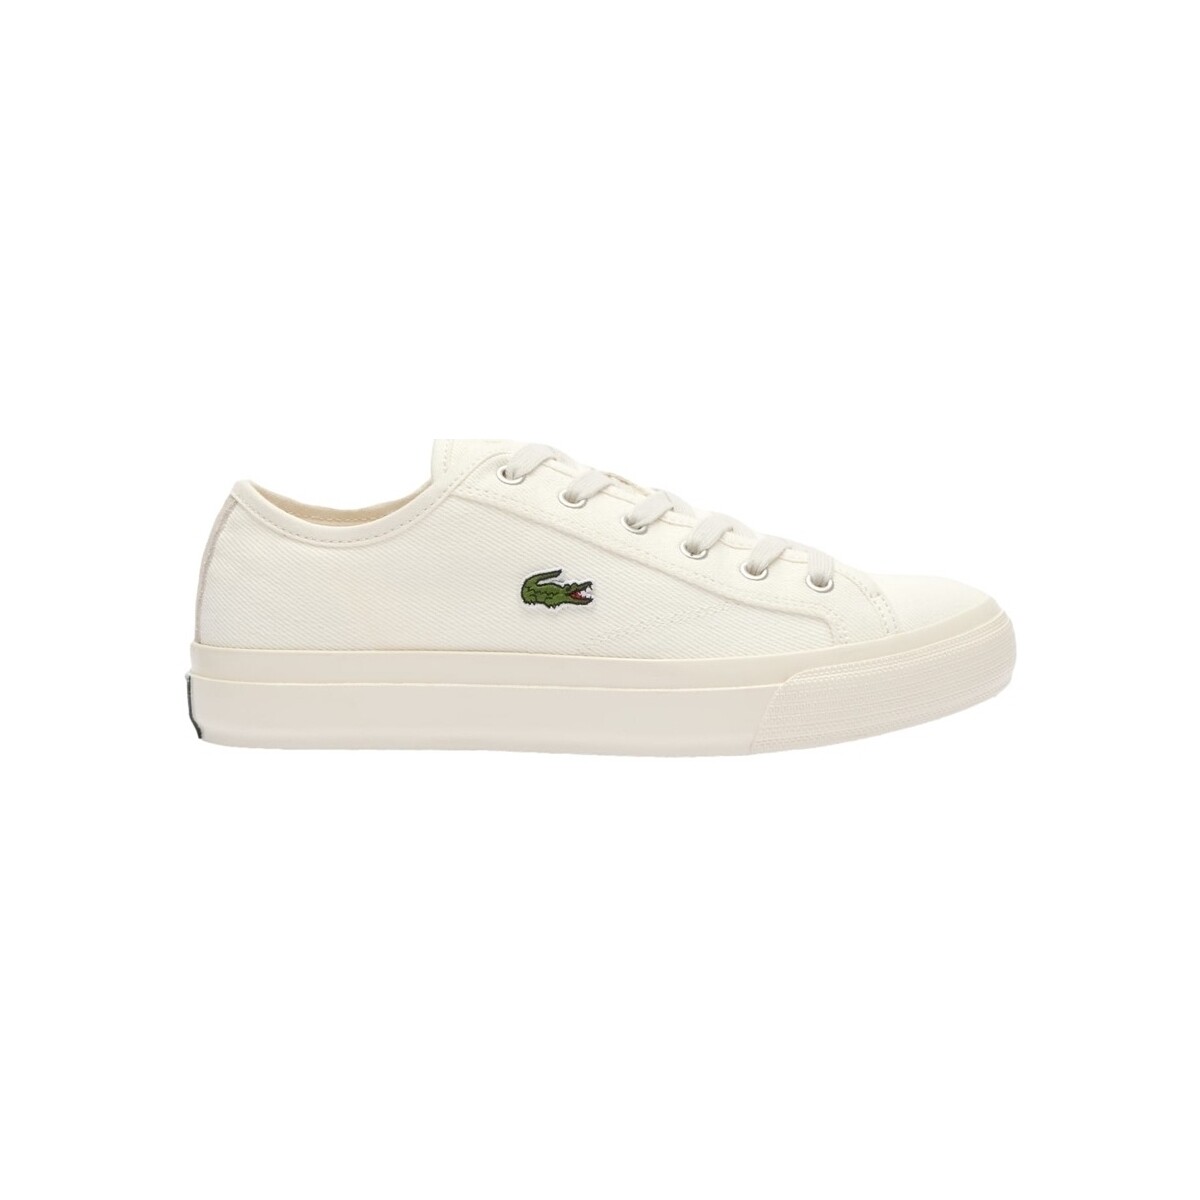 Xαμηλά Sneakers Lacoste Backcourt 124 1 CMA – Off White